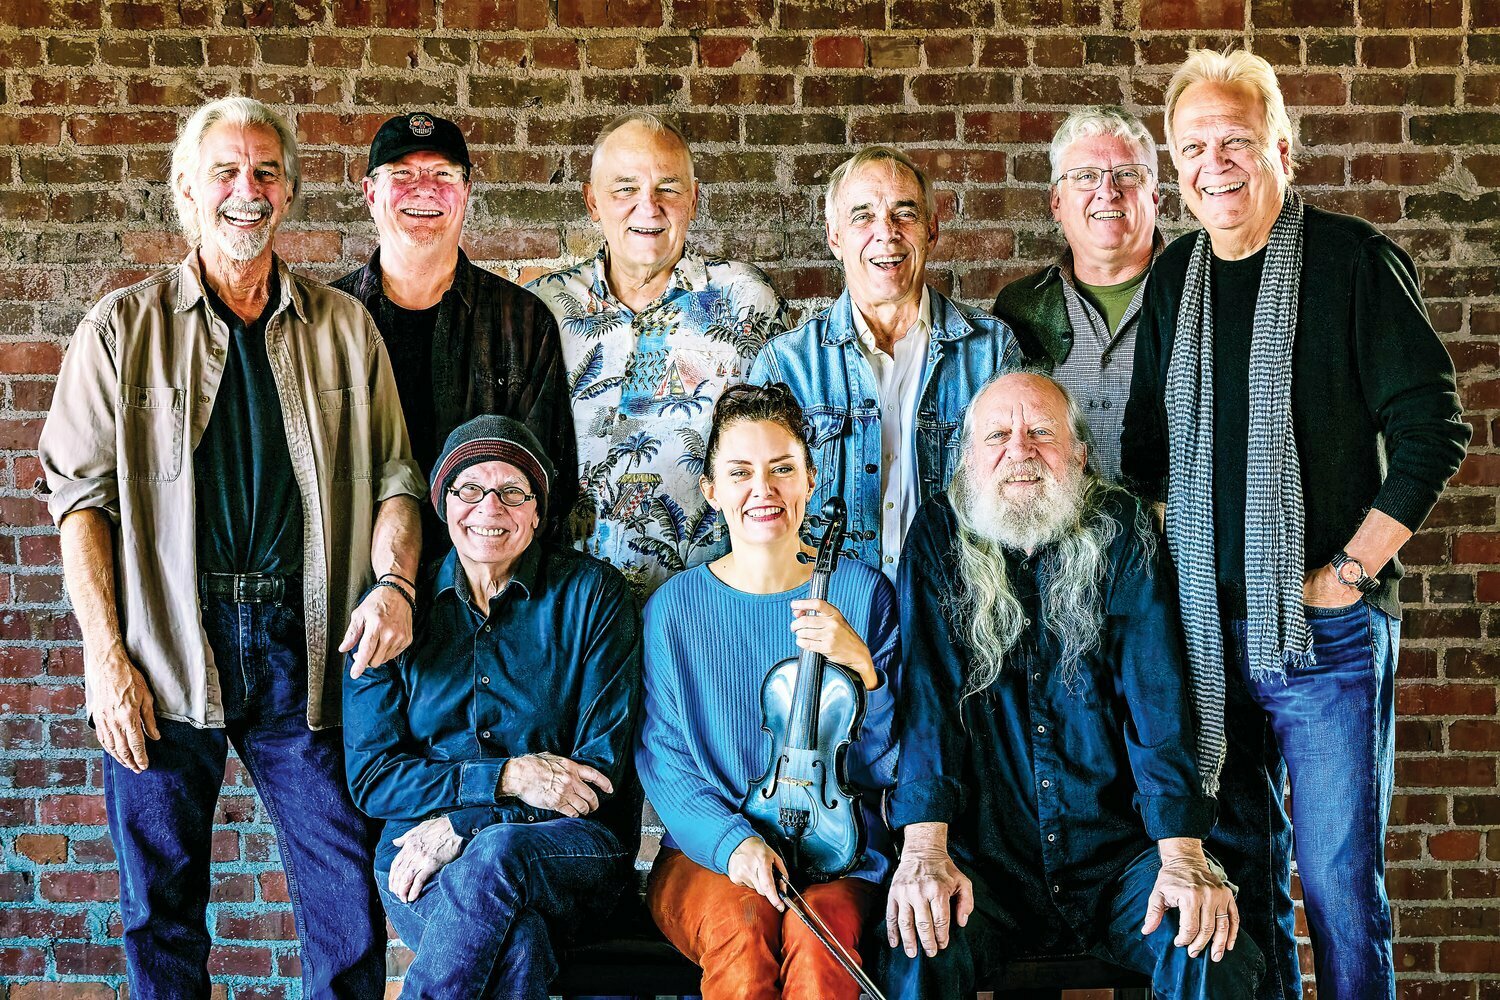 The Ozark Mountain Daredevils have performed on more than 30 tours.